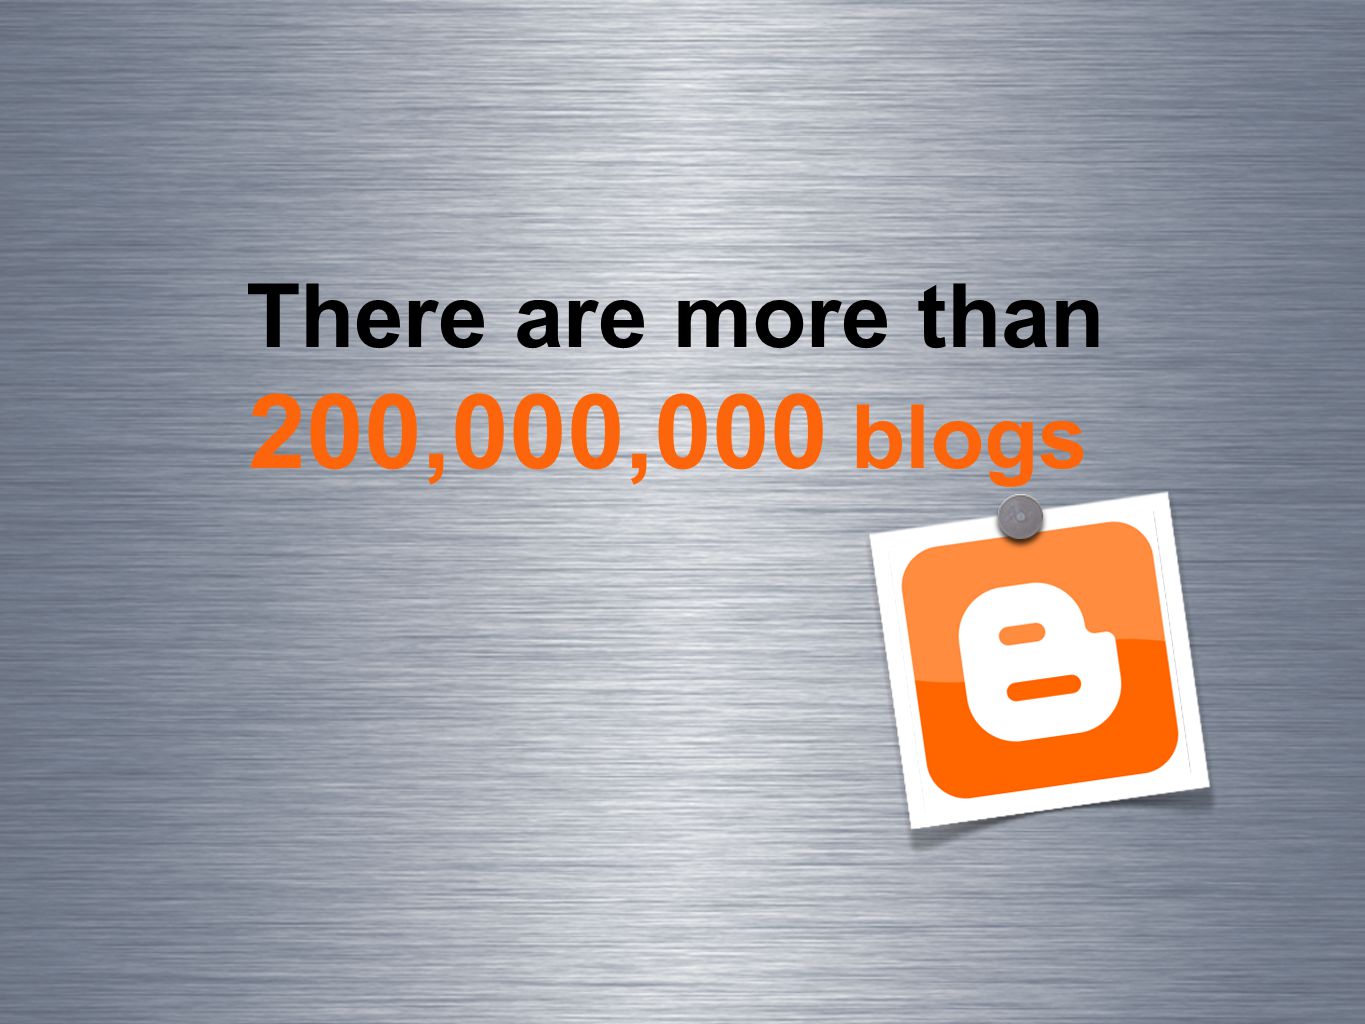 There are more than 200,000,000 blogs